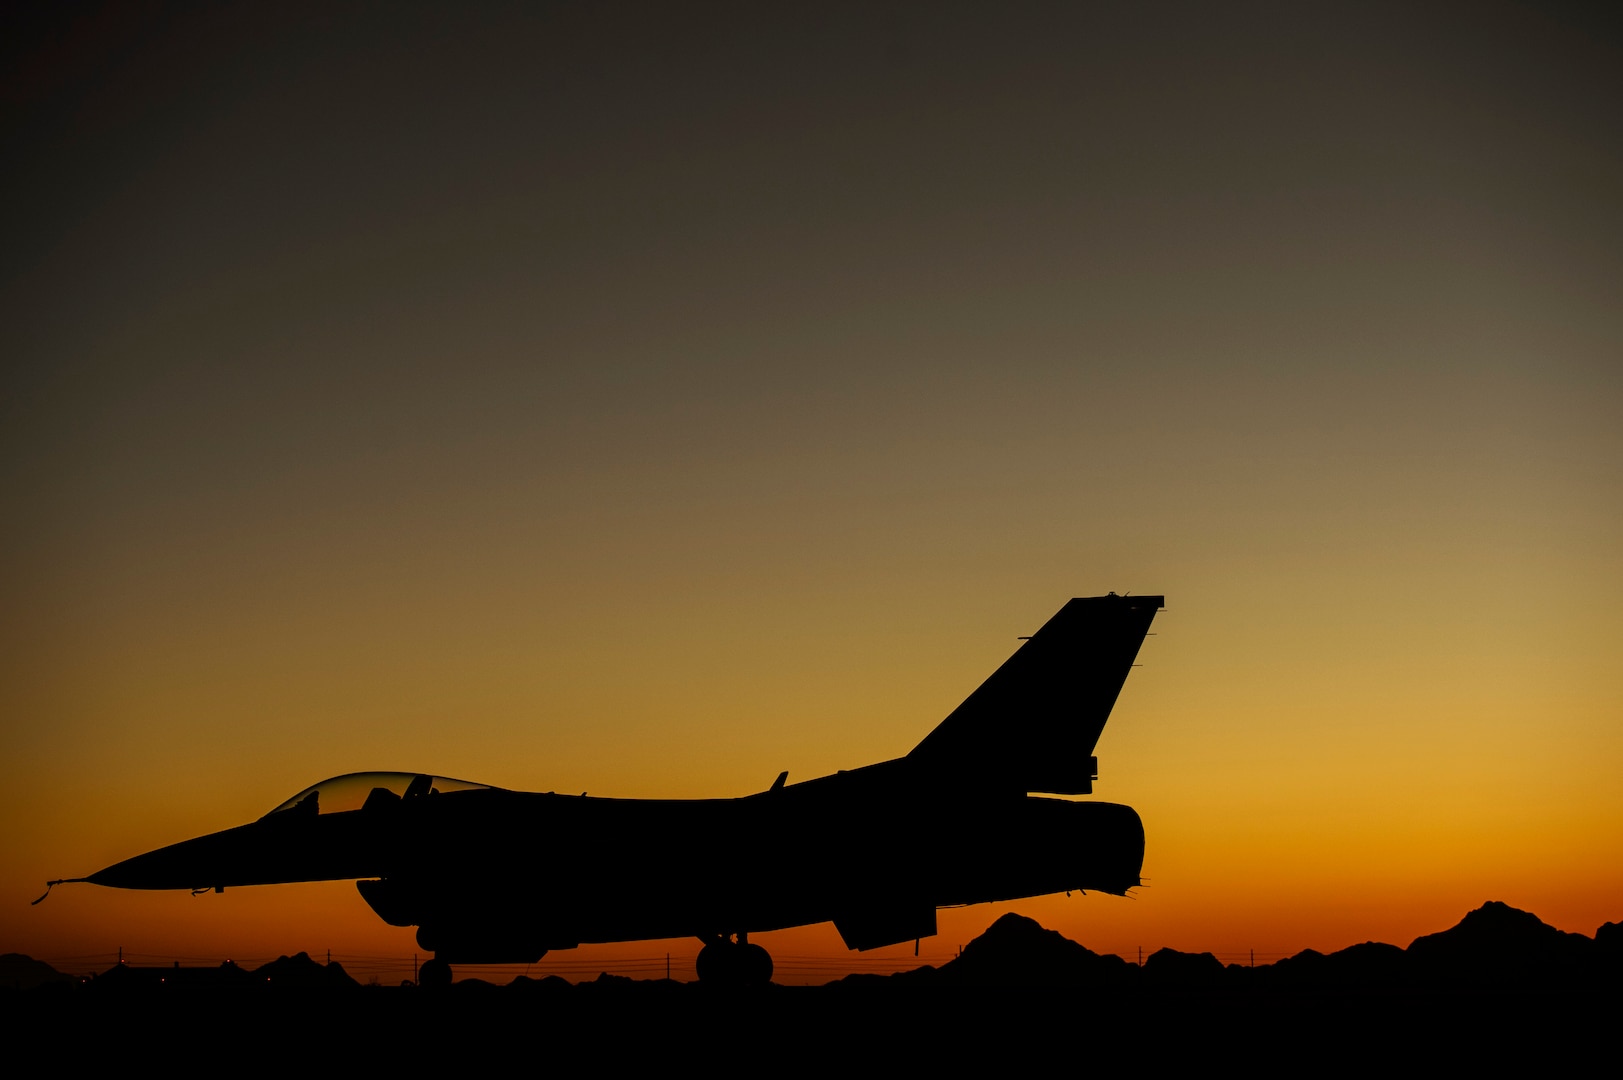 An F-16C Fighting Falcon, 182nd Fighter Squadron, sits on the ramp until the next training mission at Davis-Monthan Air Force Base, Ariz., April 13, 2014. Coronet Cactus exercise provides realistic combat training for student fighter pilots from air-to-air combat to dropping inert and live ordnance. (U.S. Air Force photo/ Staff Sgt. Jonathan Snyder)